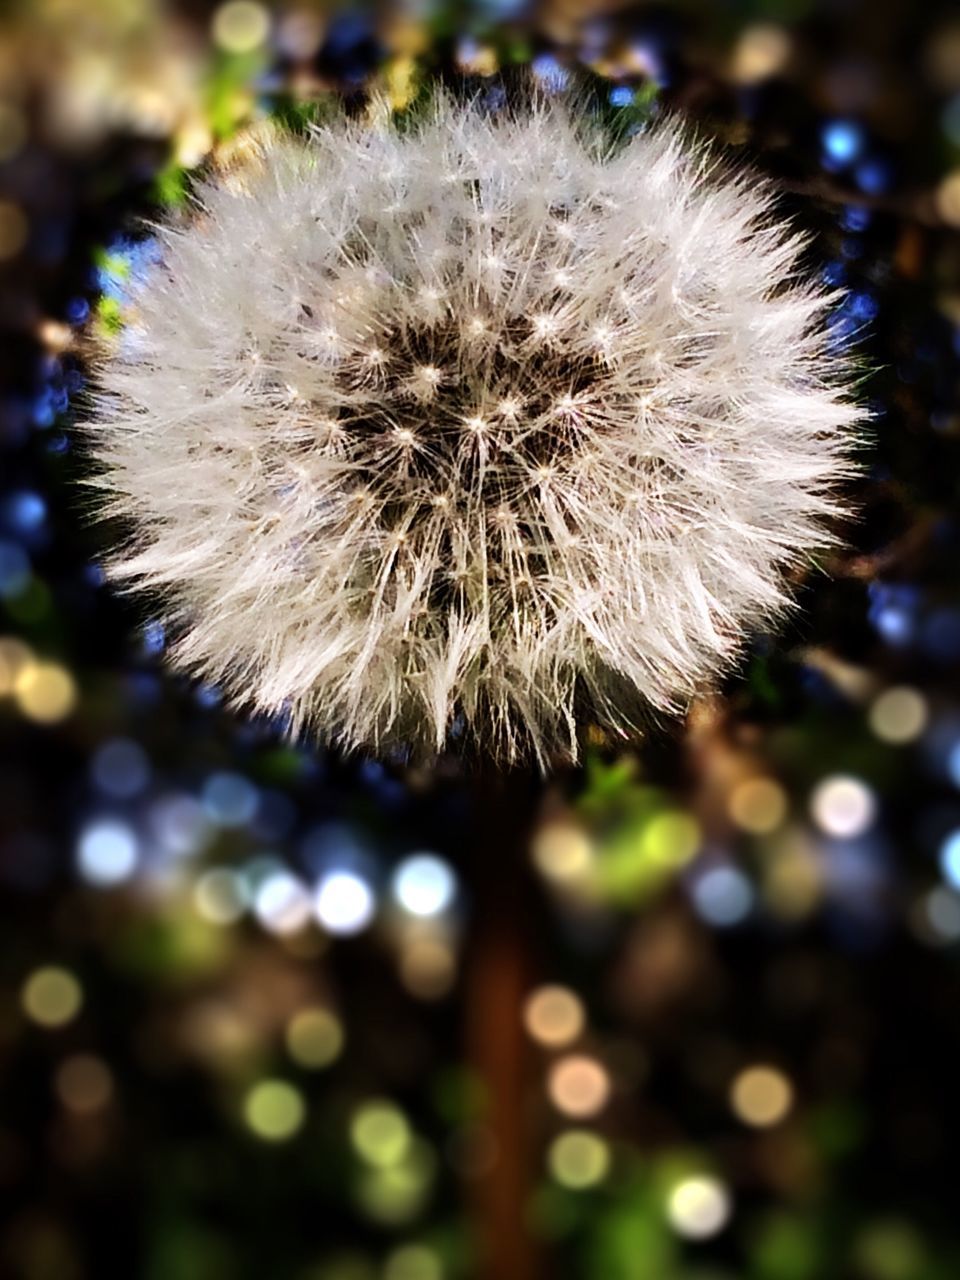 dandelion, flower, fragility, flower head, close-up, freshness, growth, white color, beauty in nature, focus on foreground, nature, single flower, softness, dandelion seed, uncultivated, white, selective focus, wildflower, outdoors, in bloom